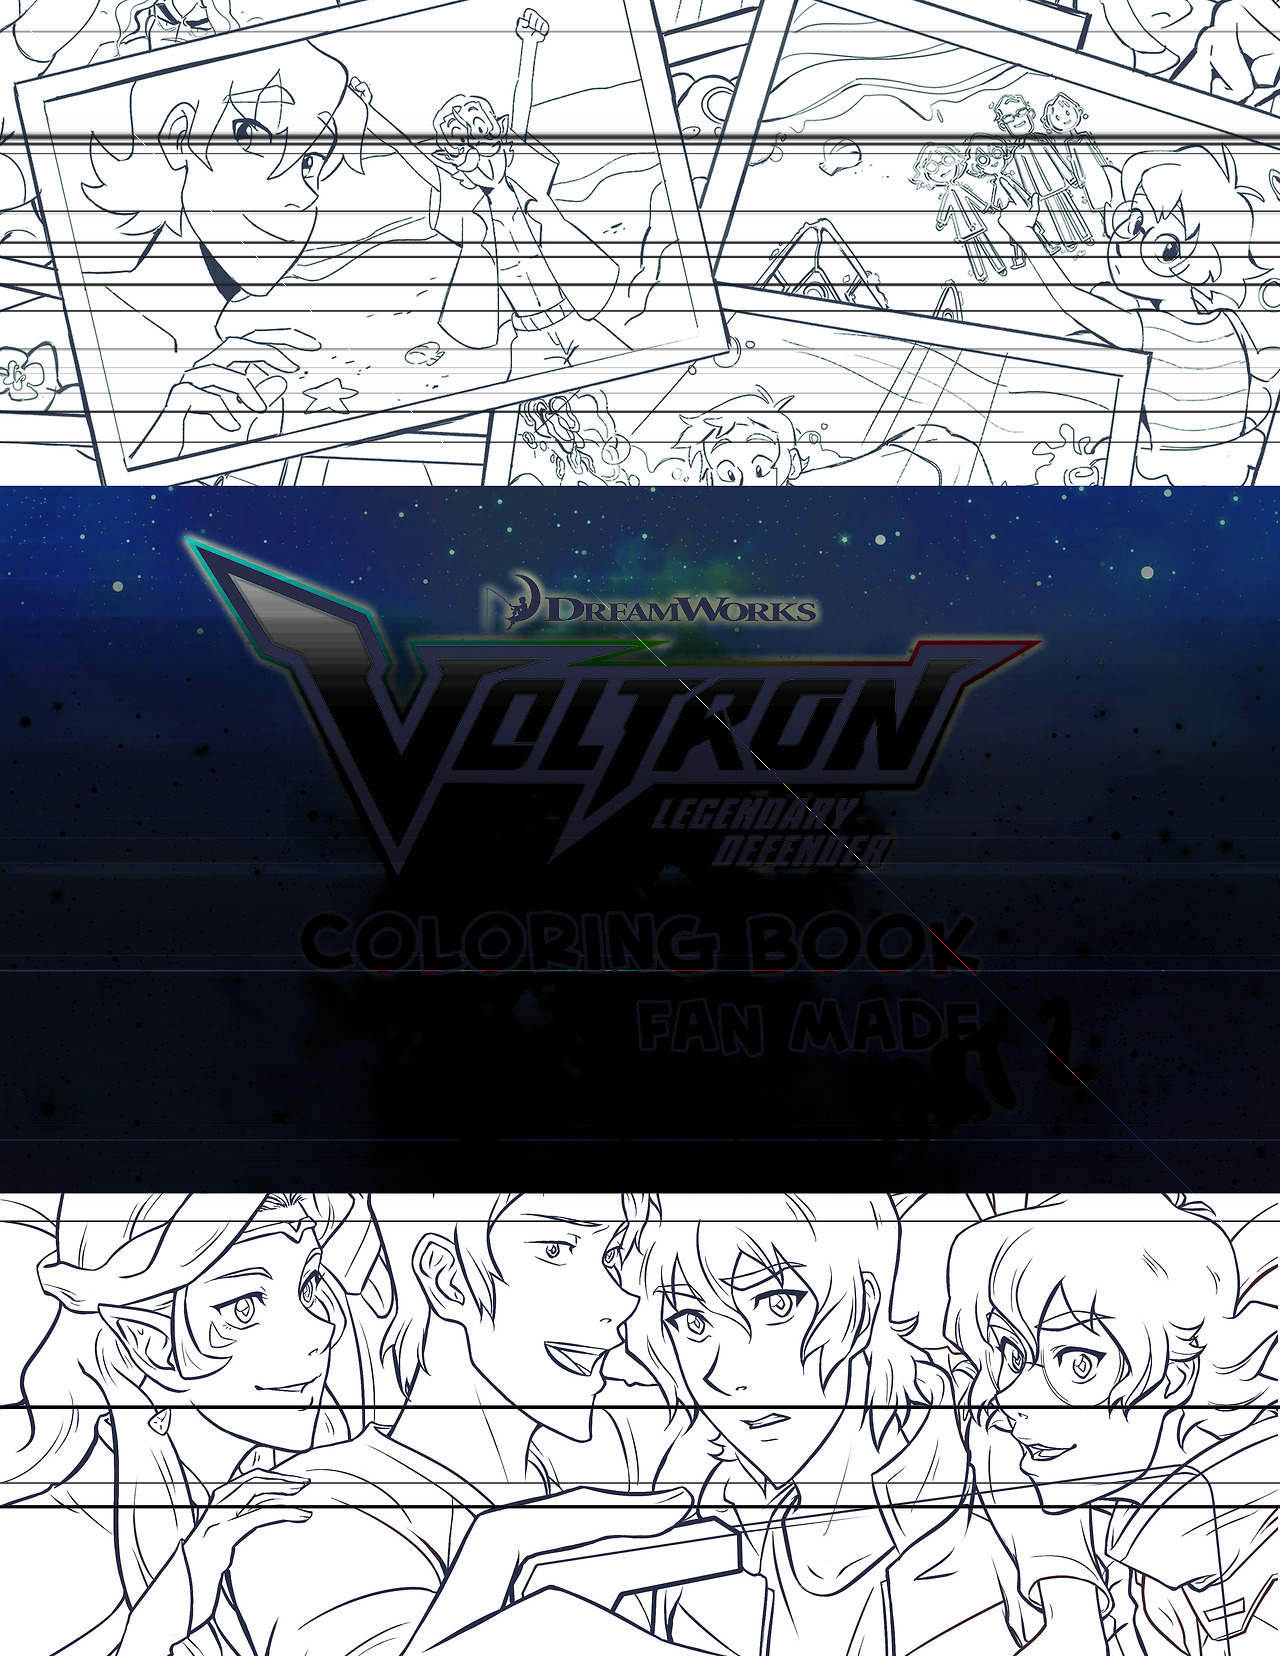 Voltron Coloring Pages Free Voltron Coloring Book Project